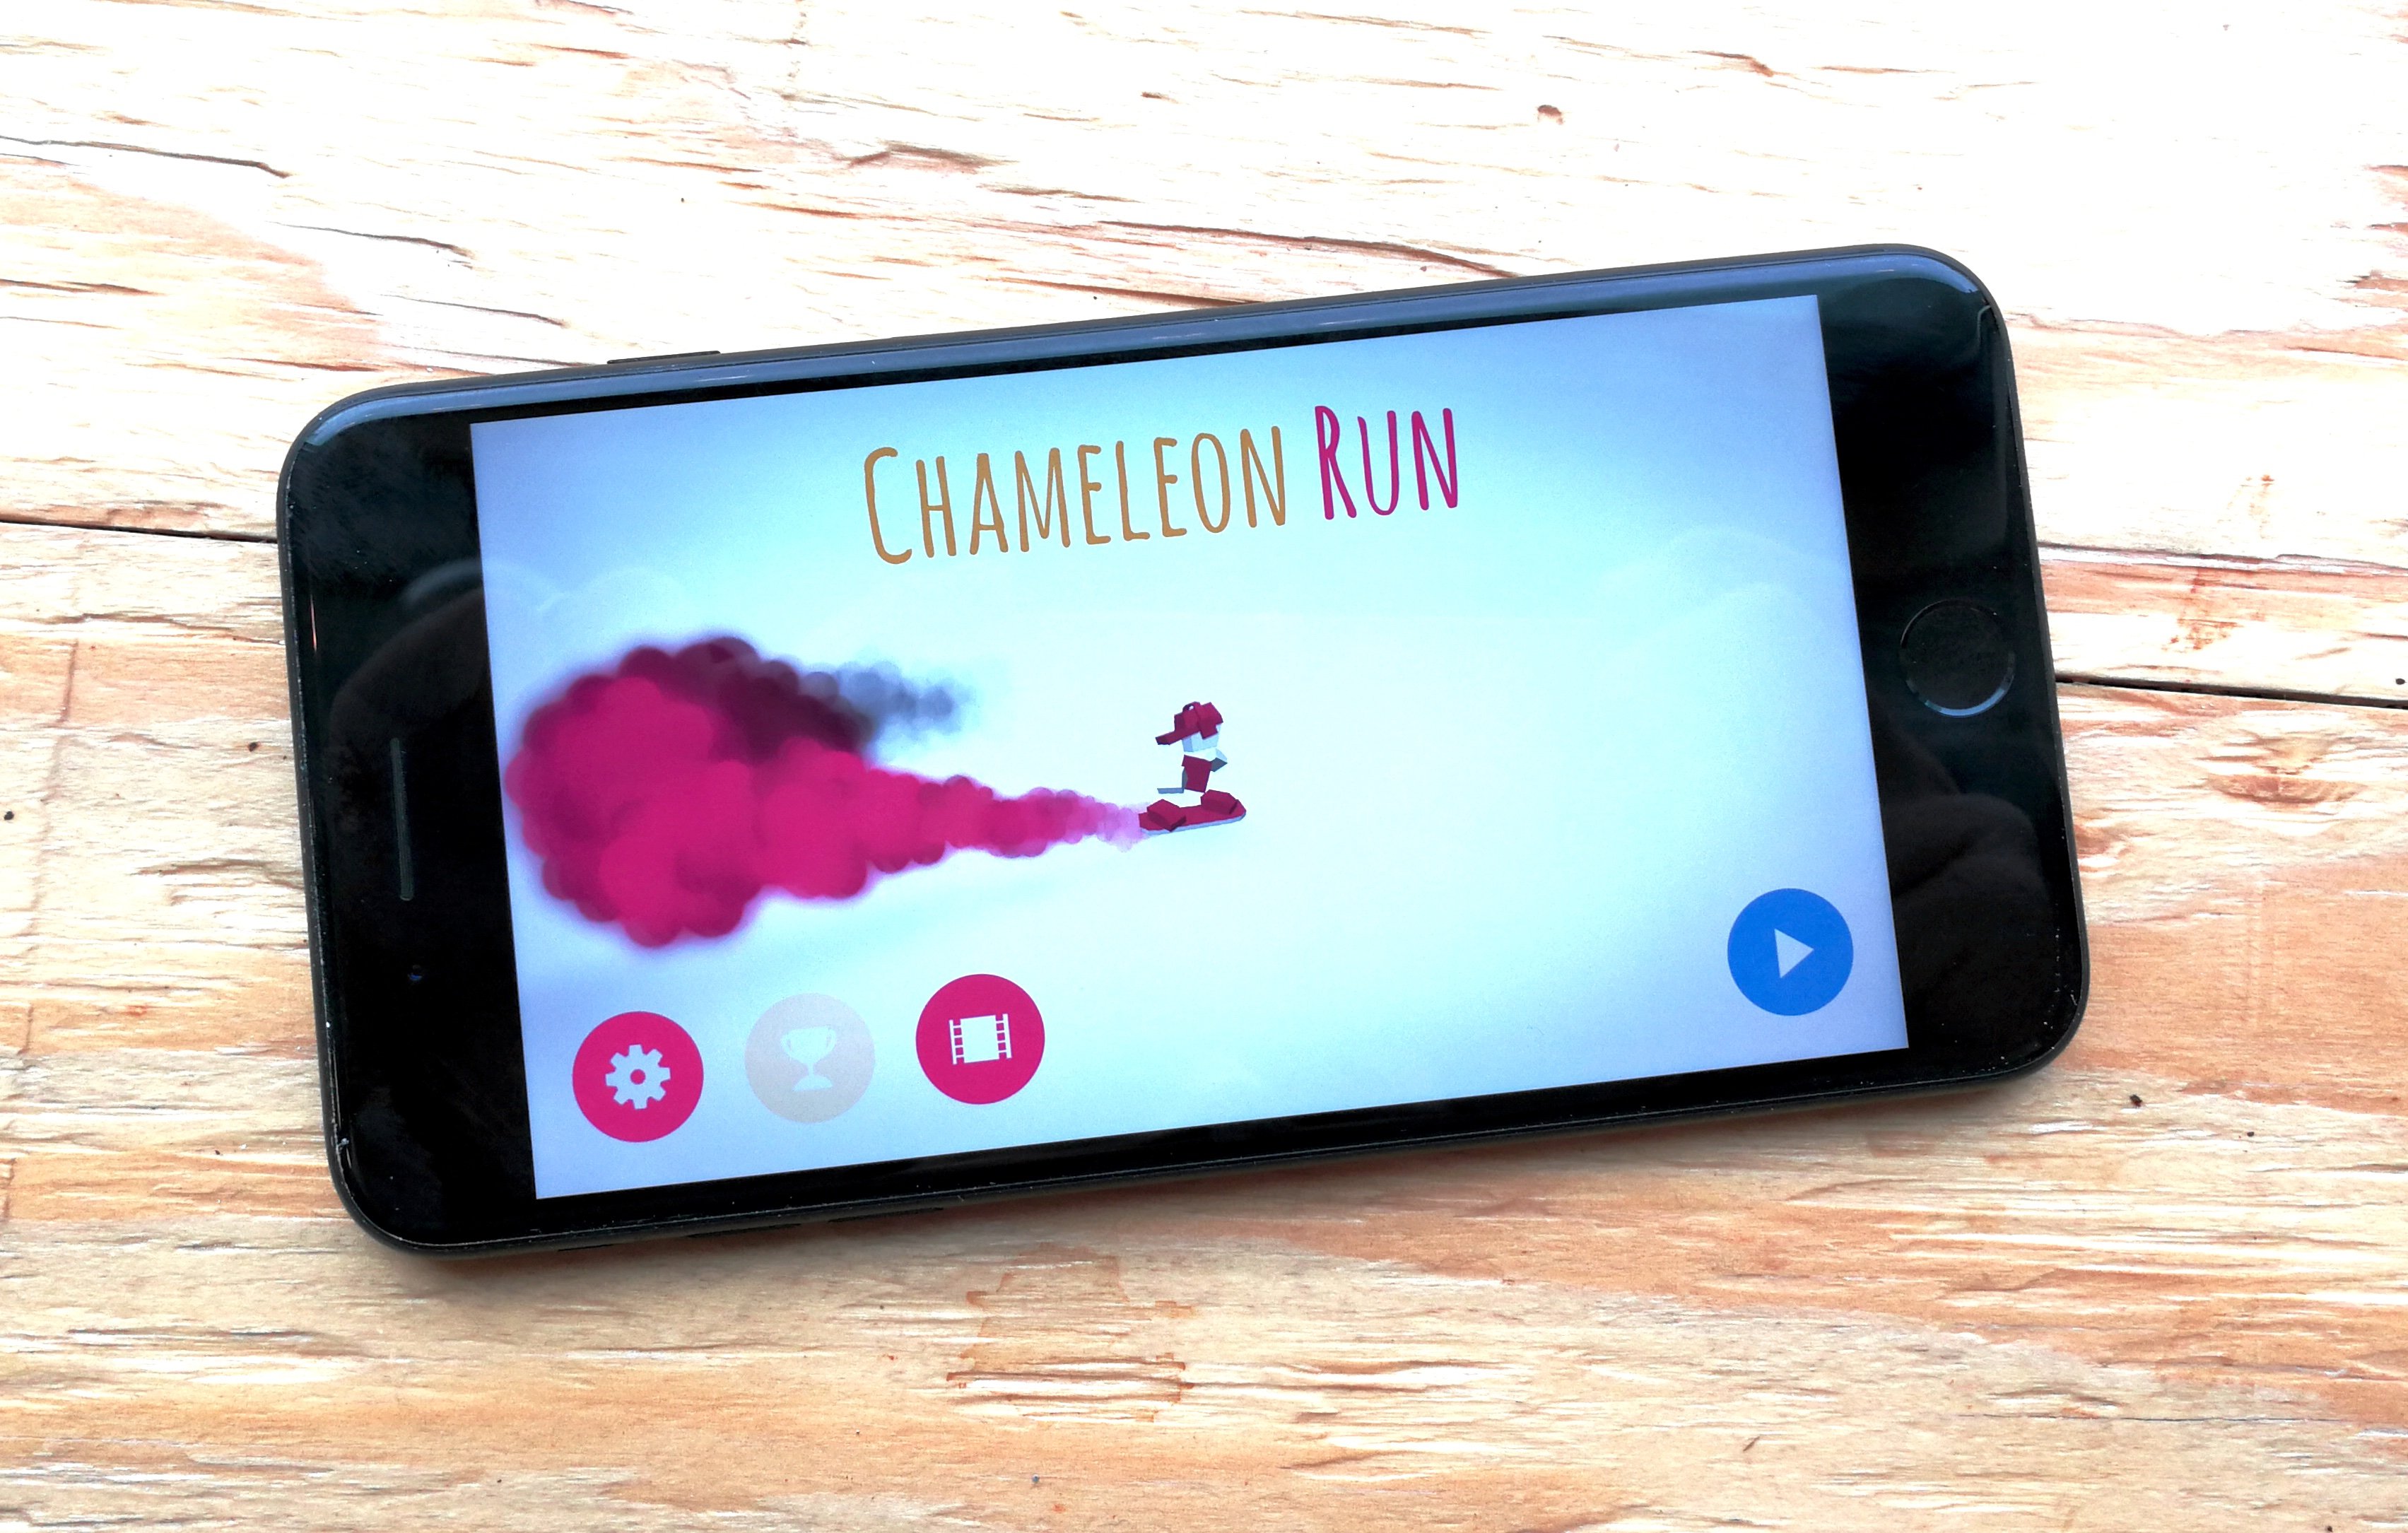 There are no Chameleon Run ads or in-app purchases.